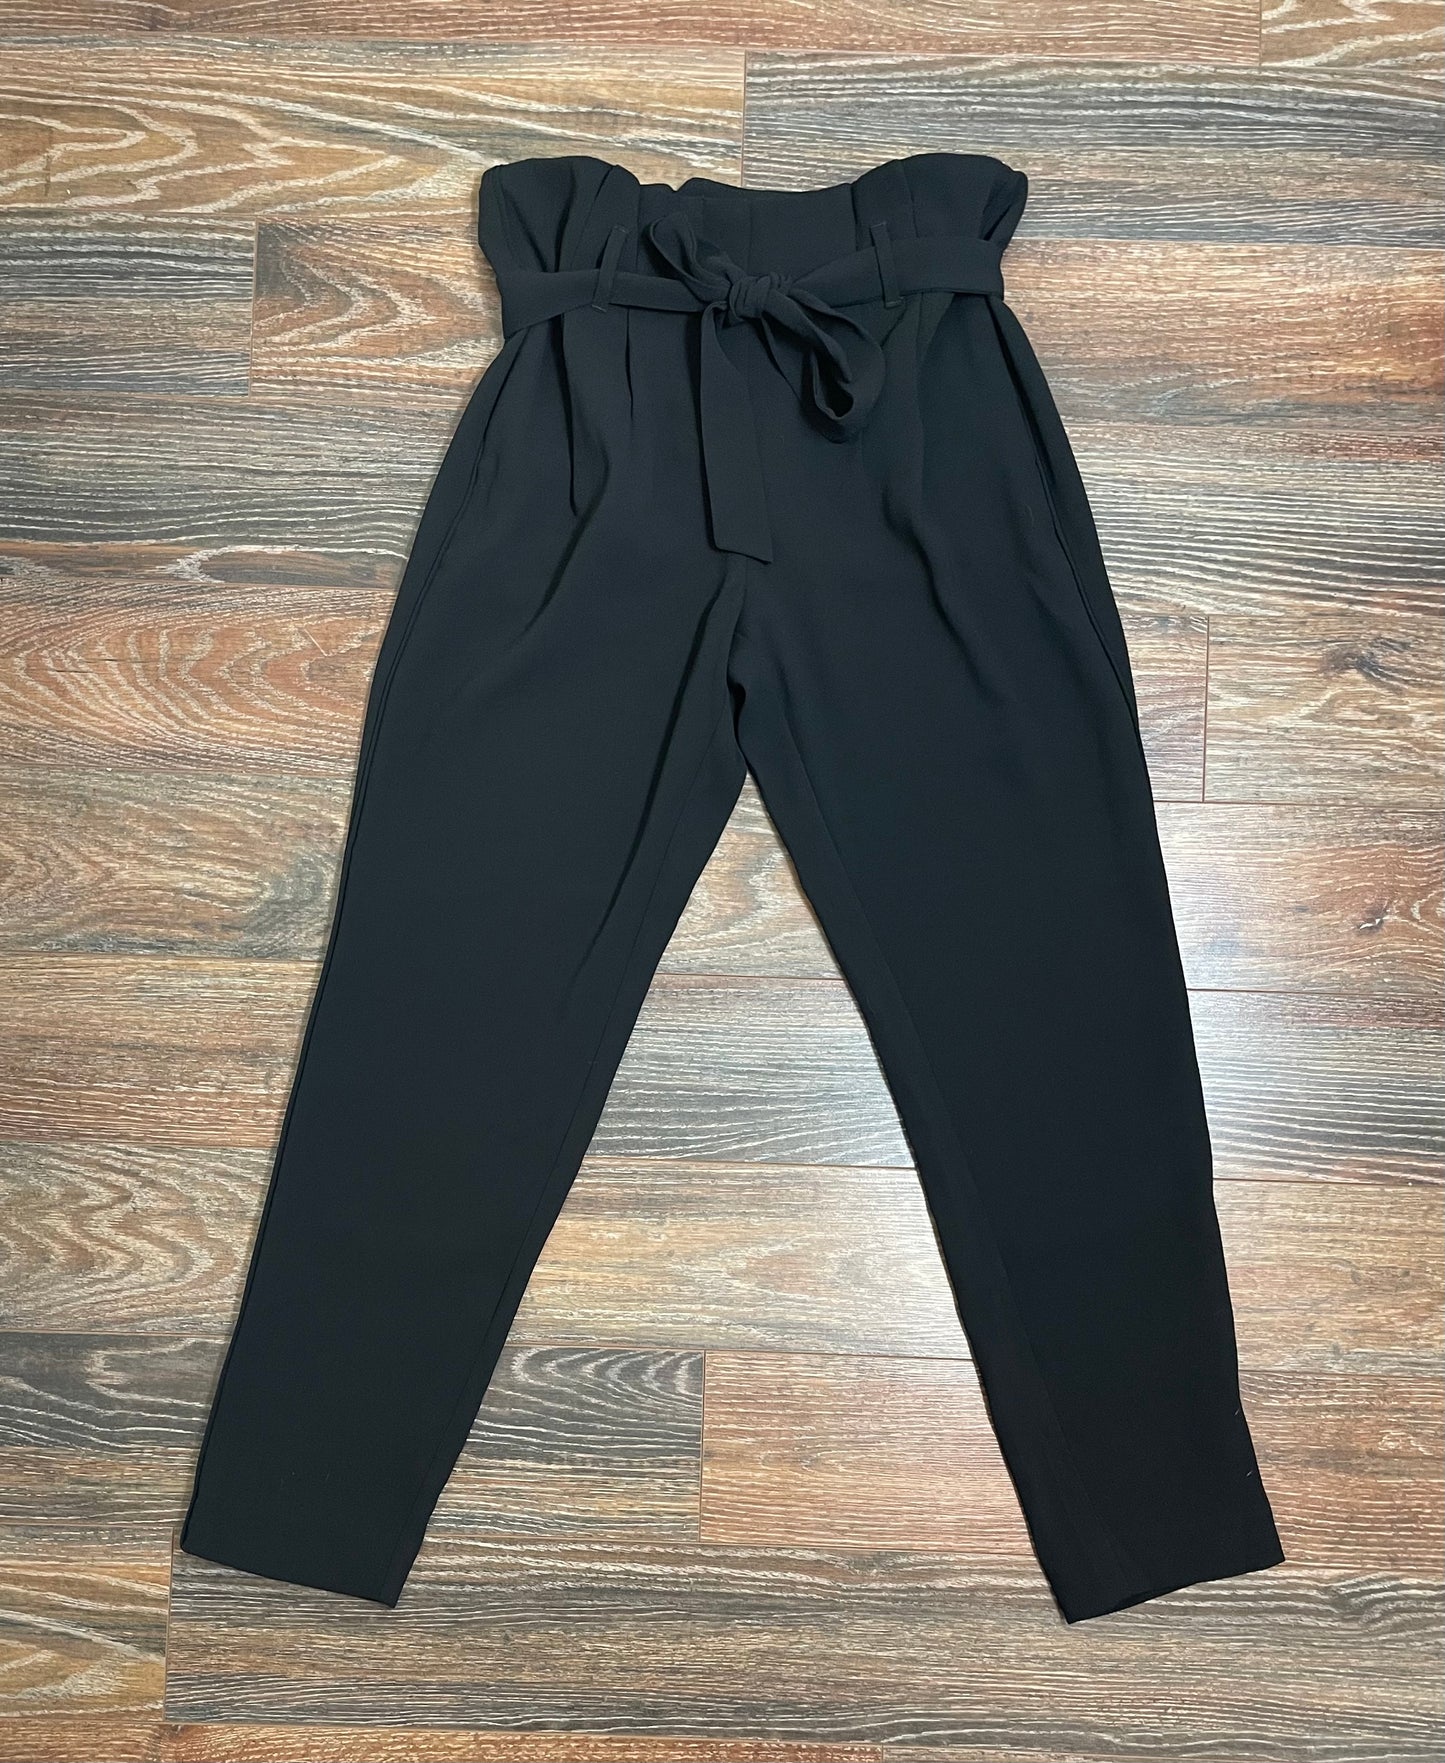 RW & Co Belted Black Pants